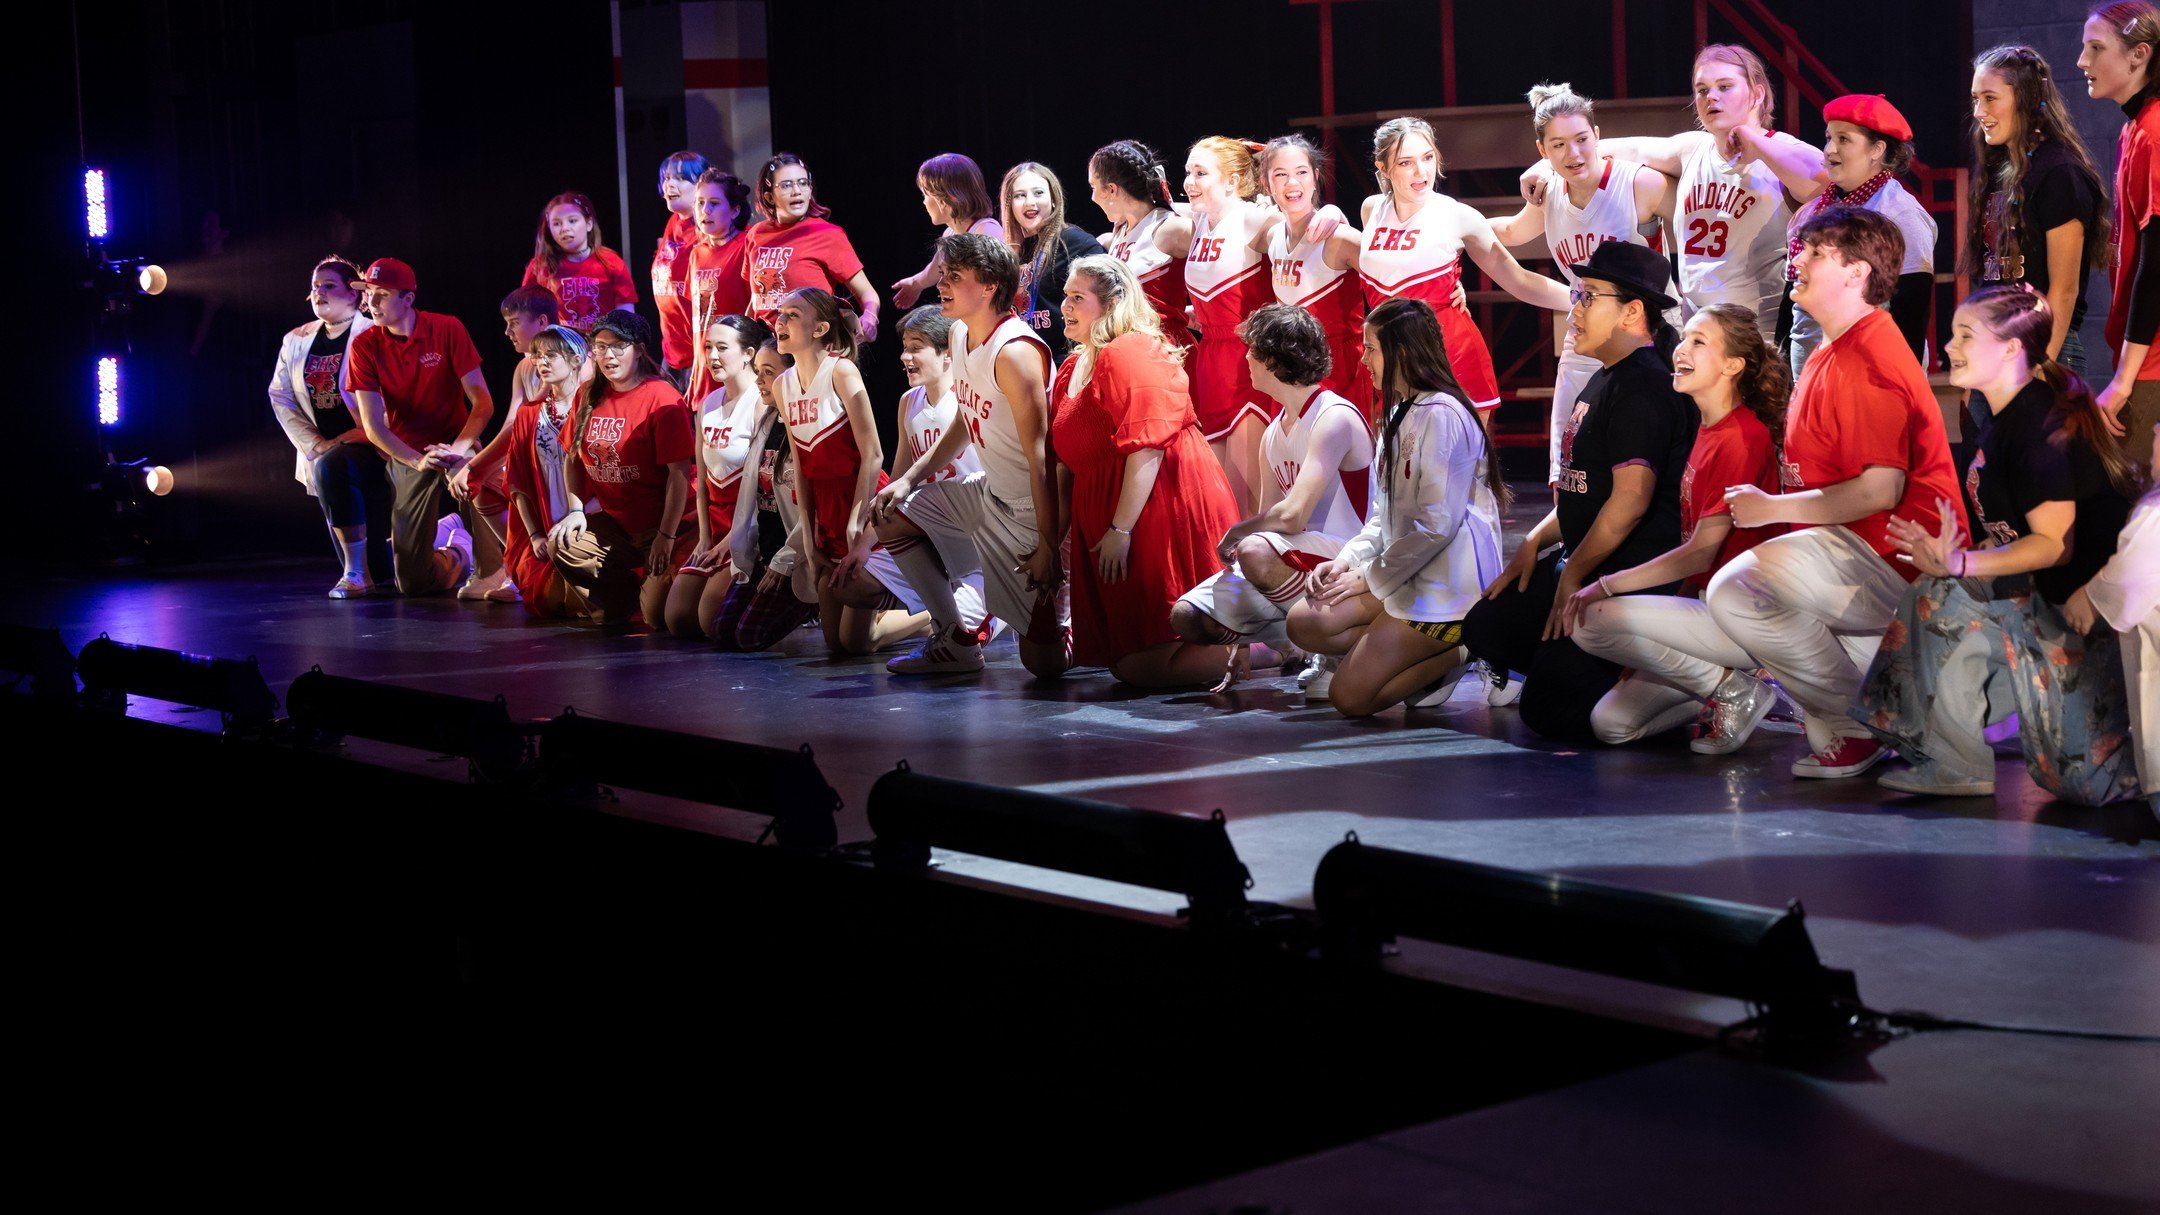 Thank you to everyone that supported our production of High School Musical. 
We hope to see you next year for Anastasia
Photo by @shilessnerphoto